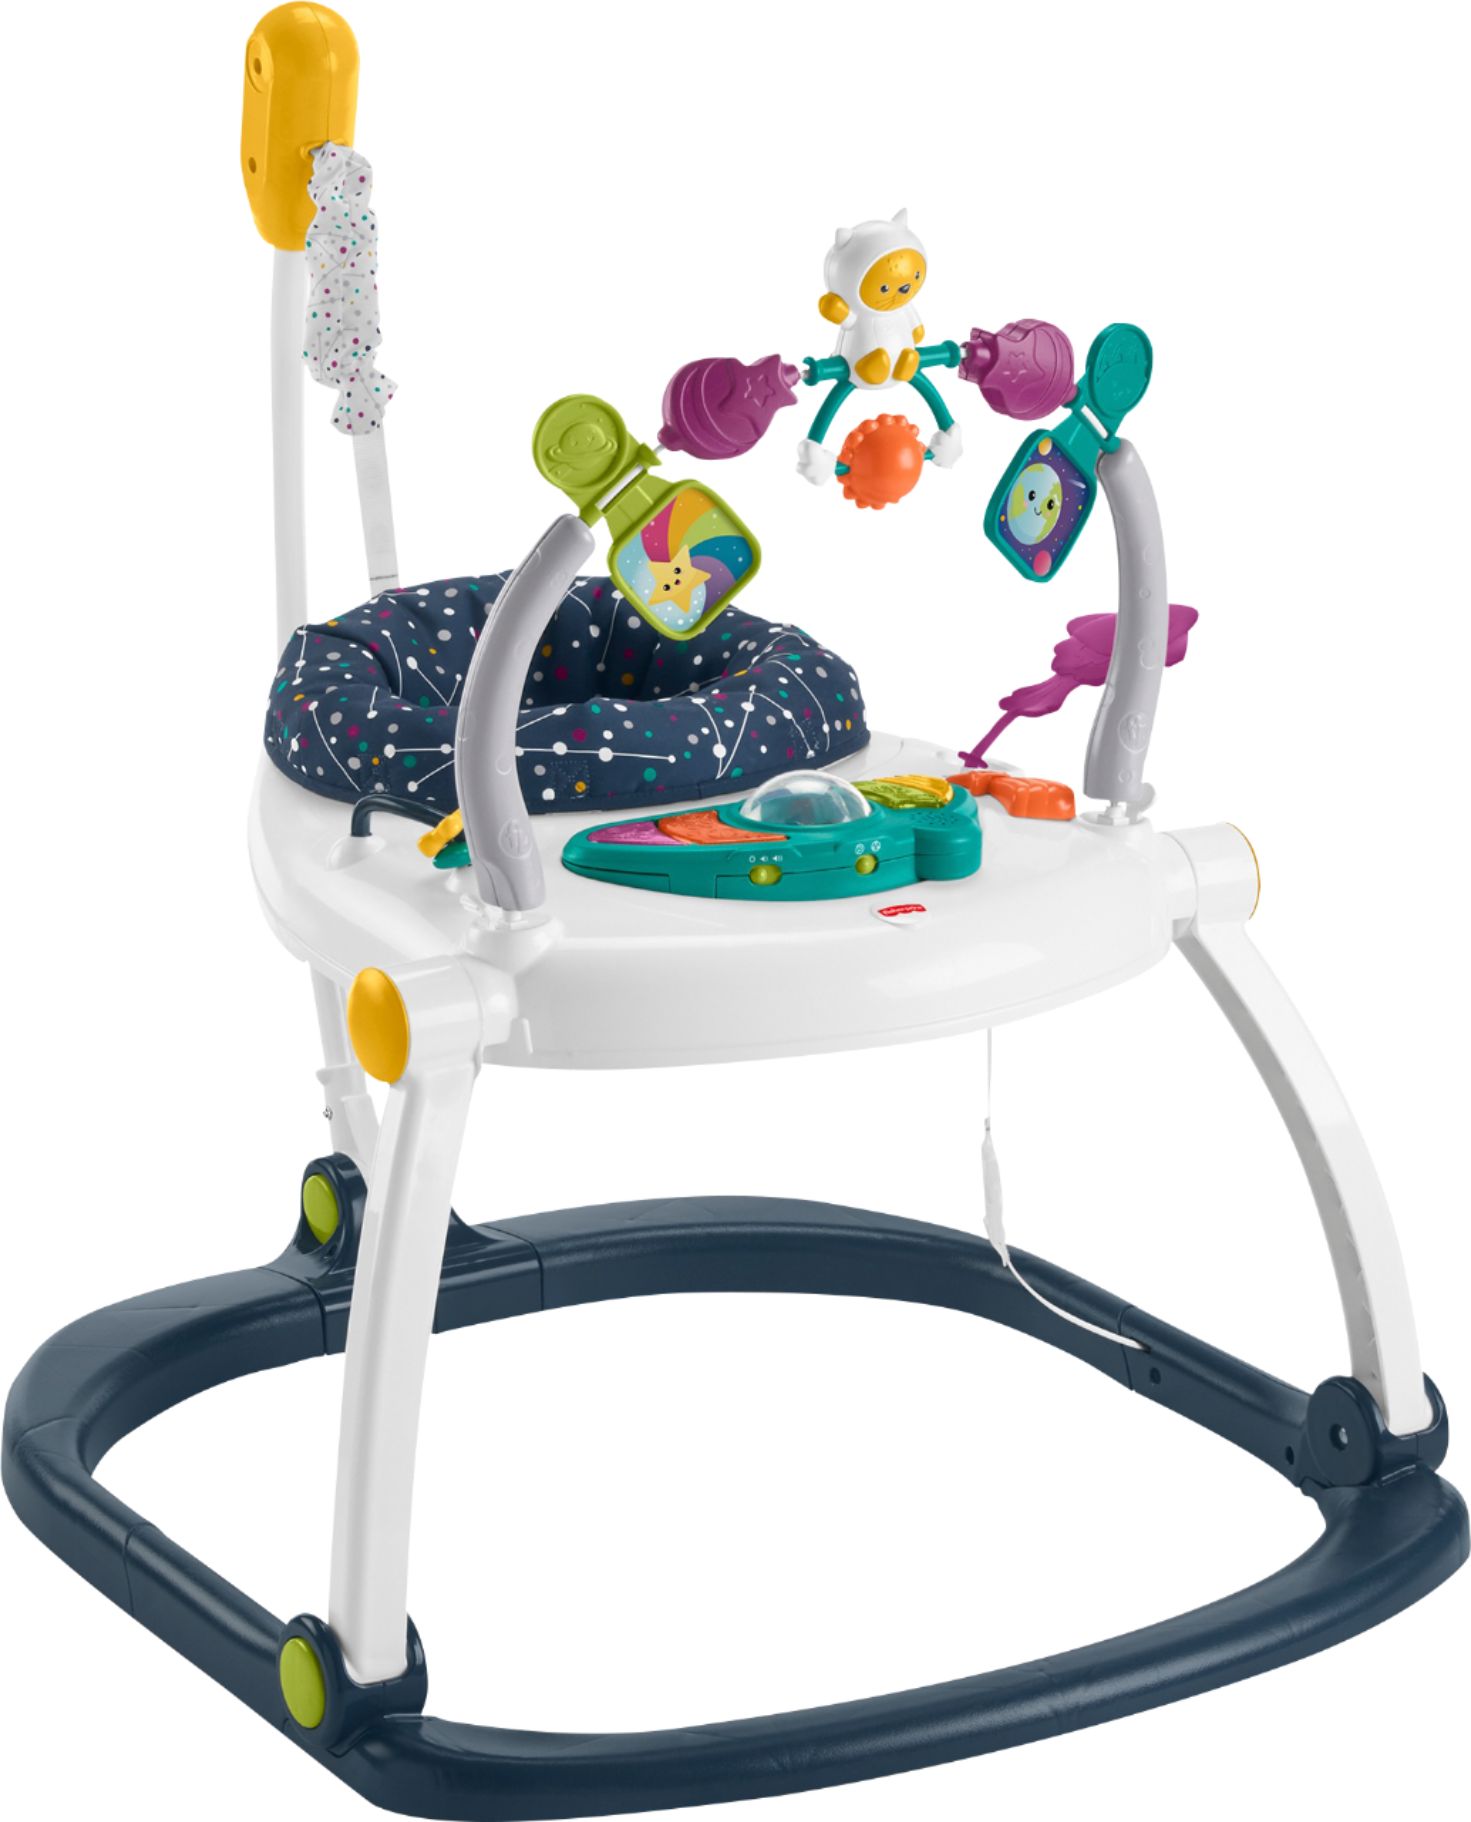 Angle View: Fisher-Price Baby Bouncer Activity Center Jumperoo SpaceSaver with Lights & Sounds, Astro Kitty